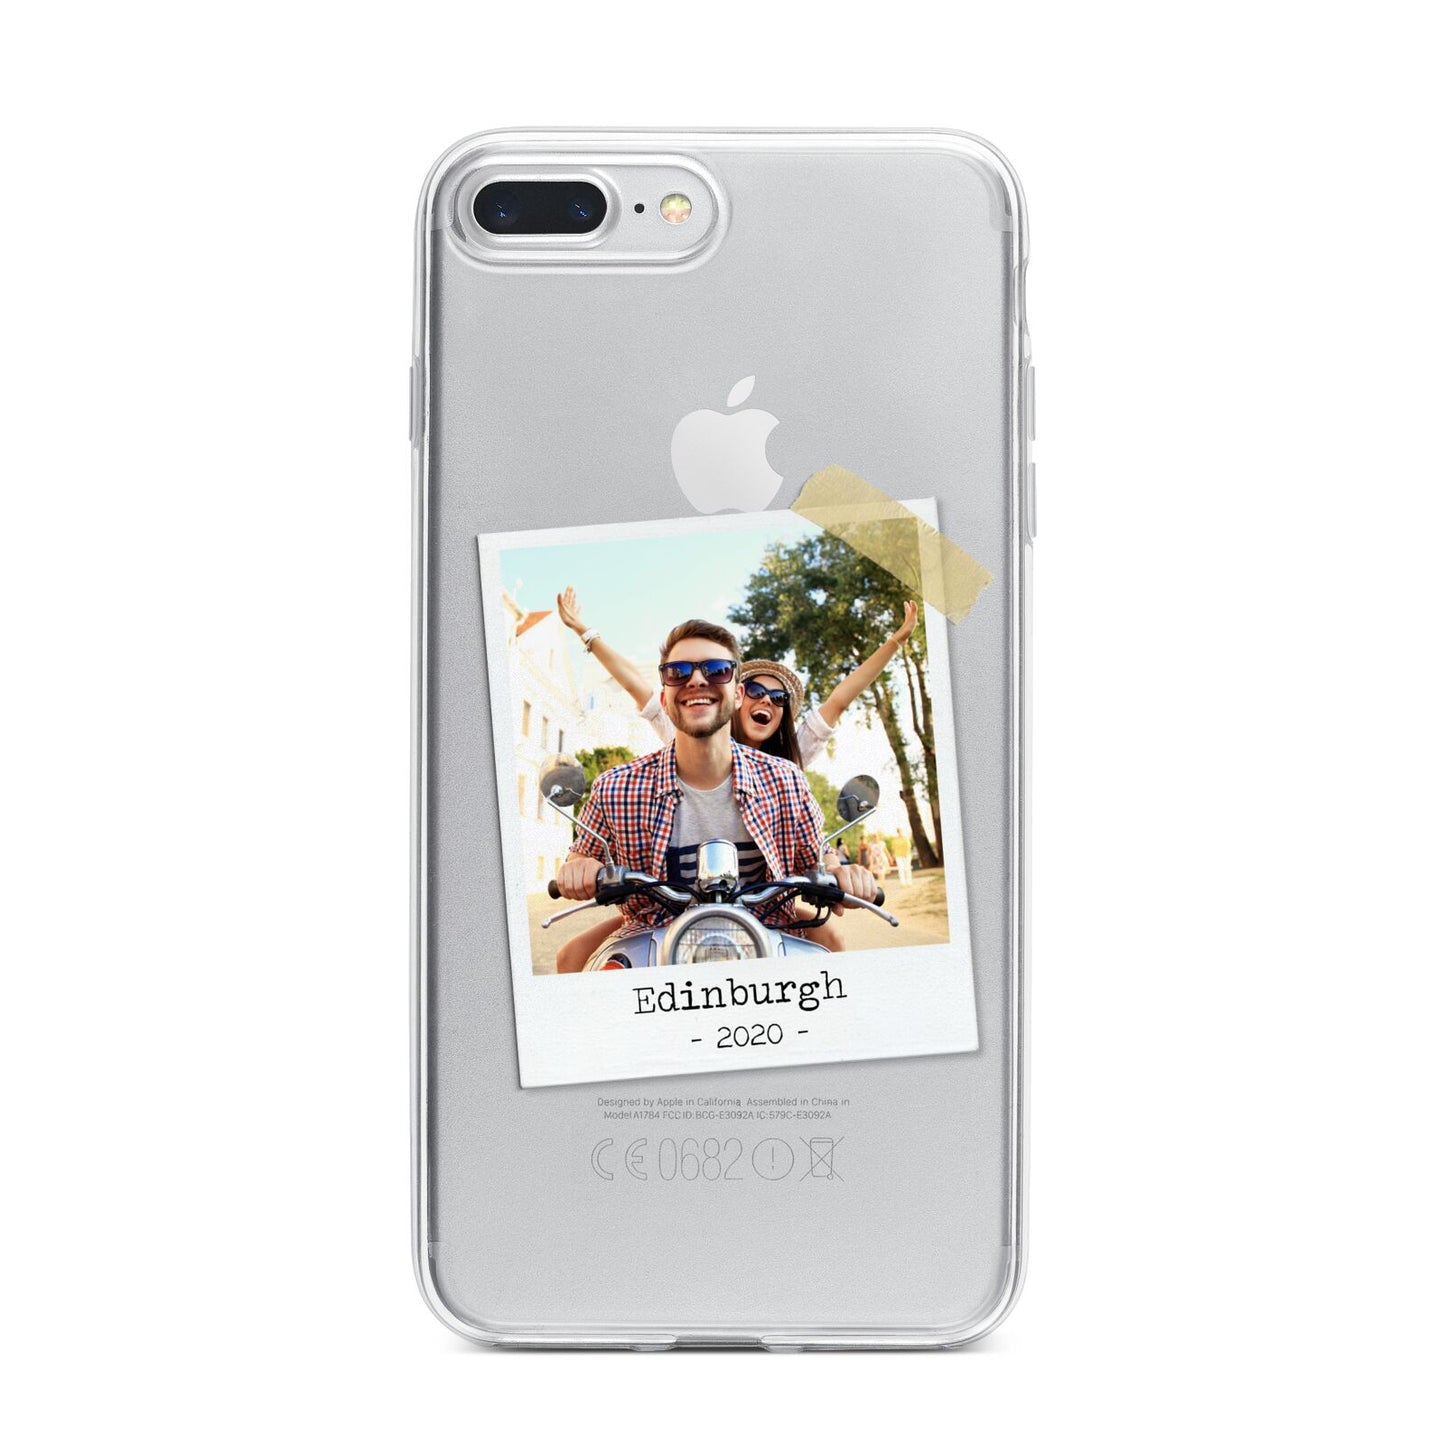 Taped Holiday Snap Photo Upload iPhone 7 Plus Bumper Case on Silver iPhone